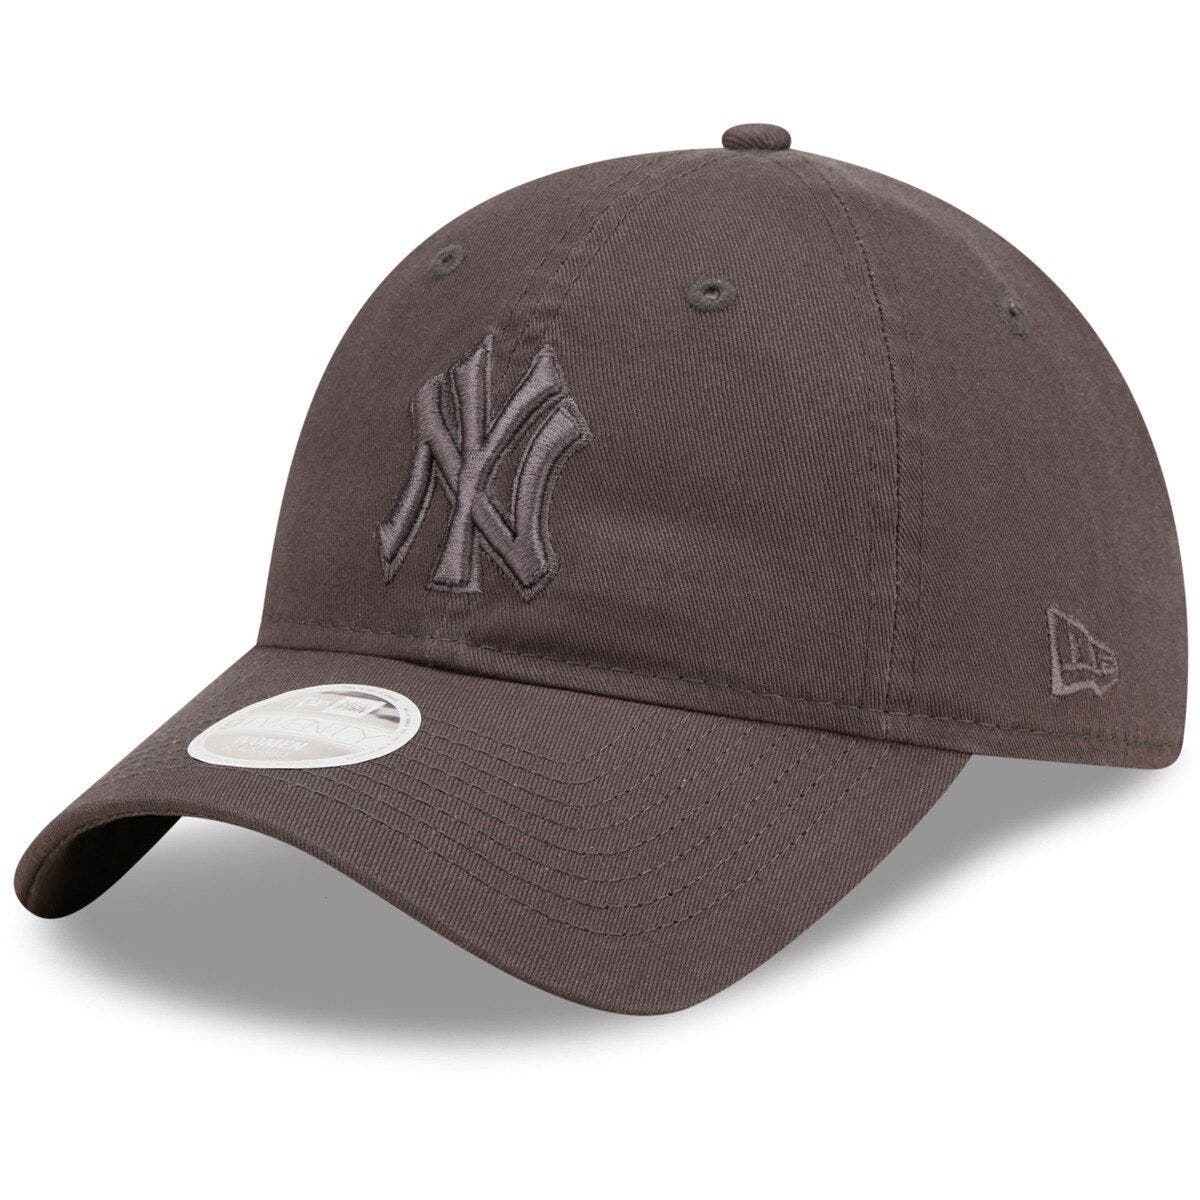 Yankees Hat for Women and Men Yankees-C 9Fifty Adjustable Baseball Cap as a Gift for Fans Friends and Family 